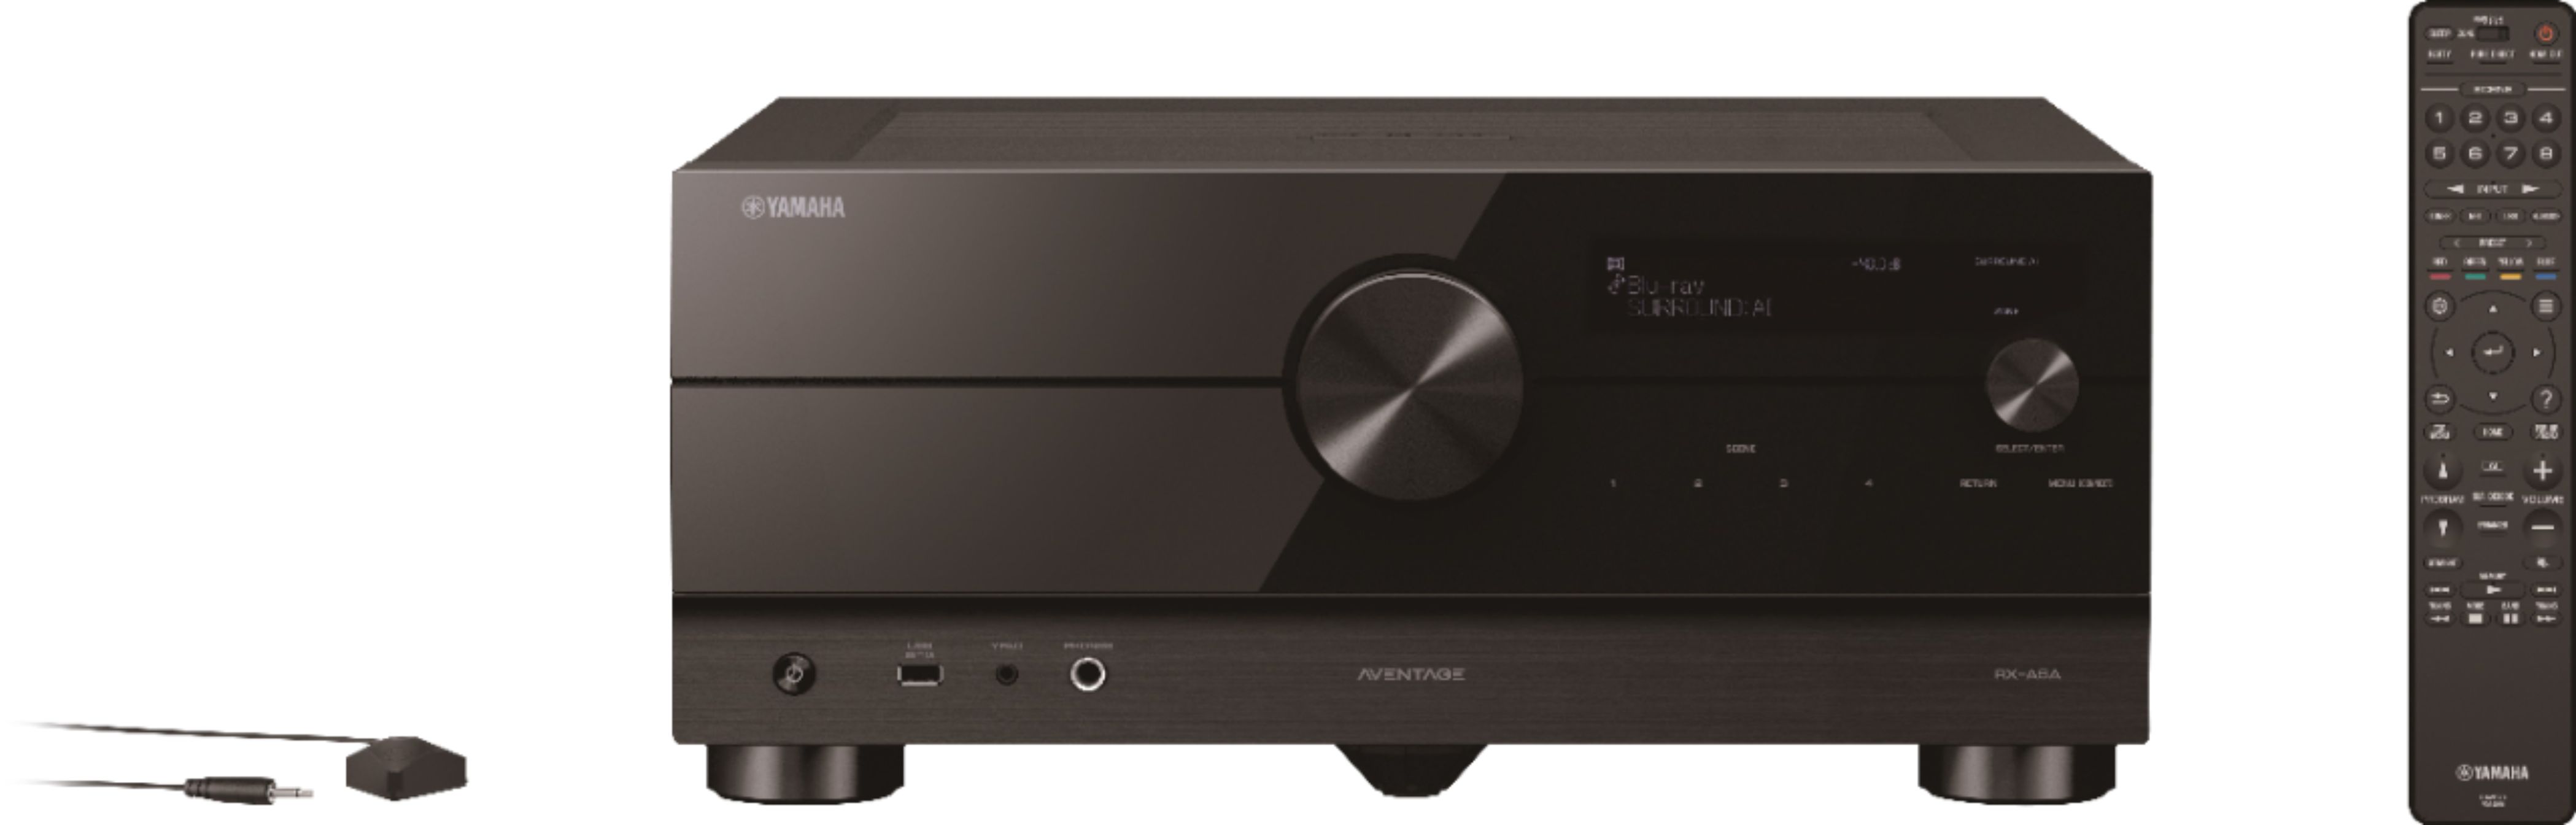 Yamaha AVENTAGE RX-A6A 150W 9.2-Channel AV Receiver with 8K HDMI 